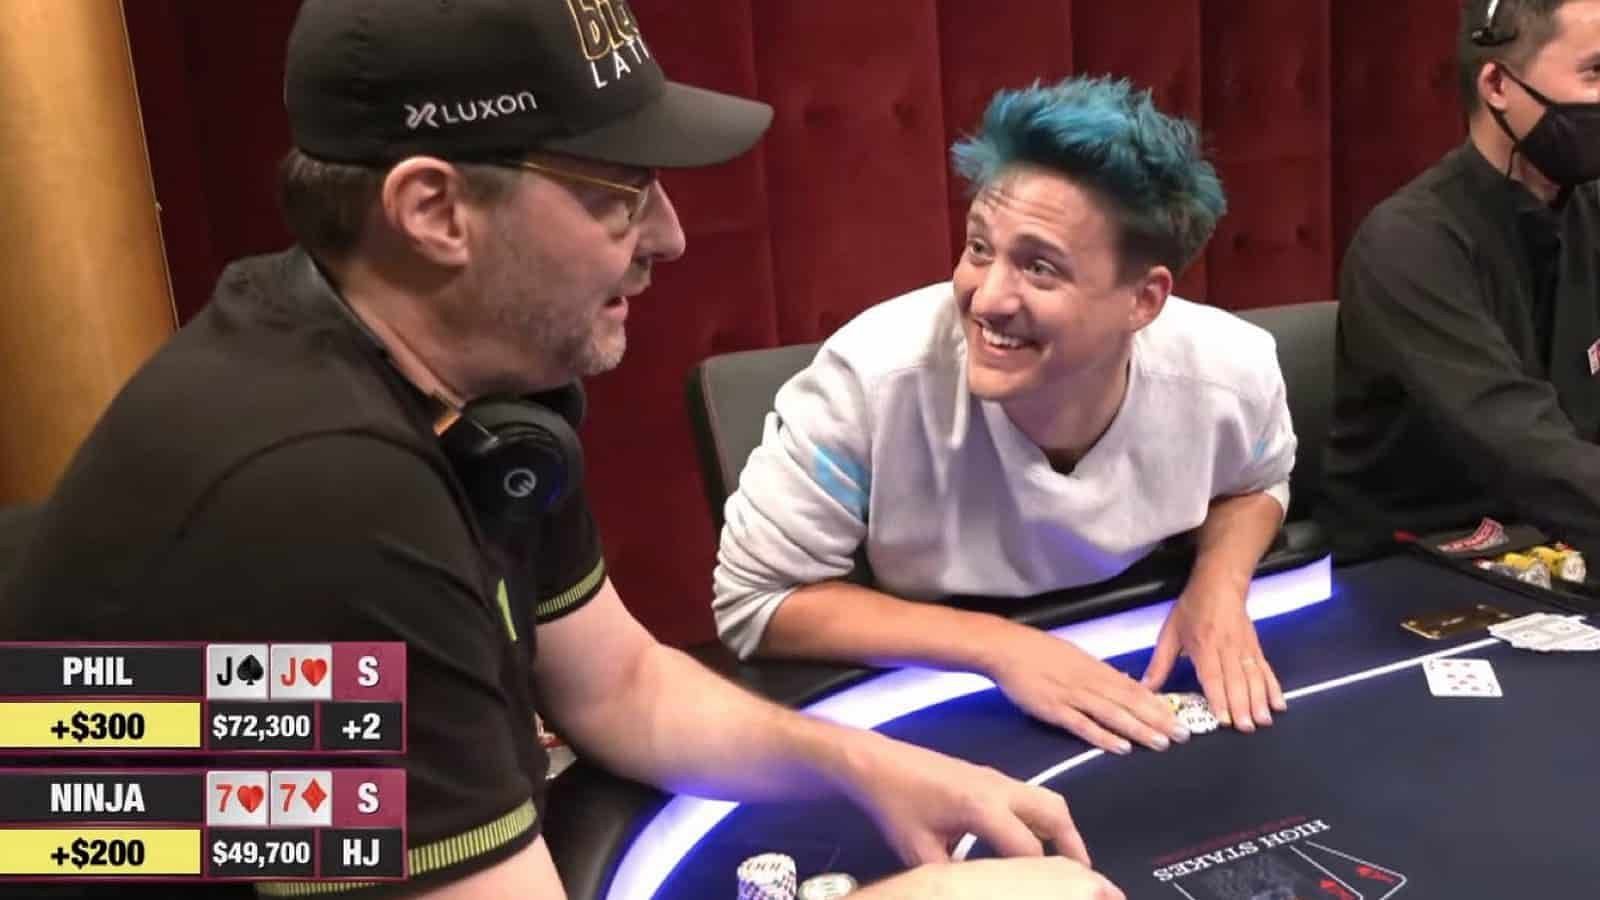 Ninja asked fans on Twitter to use this image of him and Phil Hellmuth as a new meme template (Image via Ninja/Twitter)